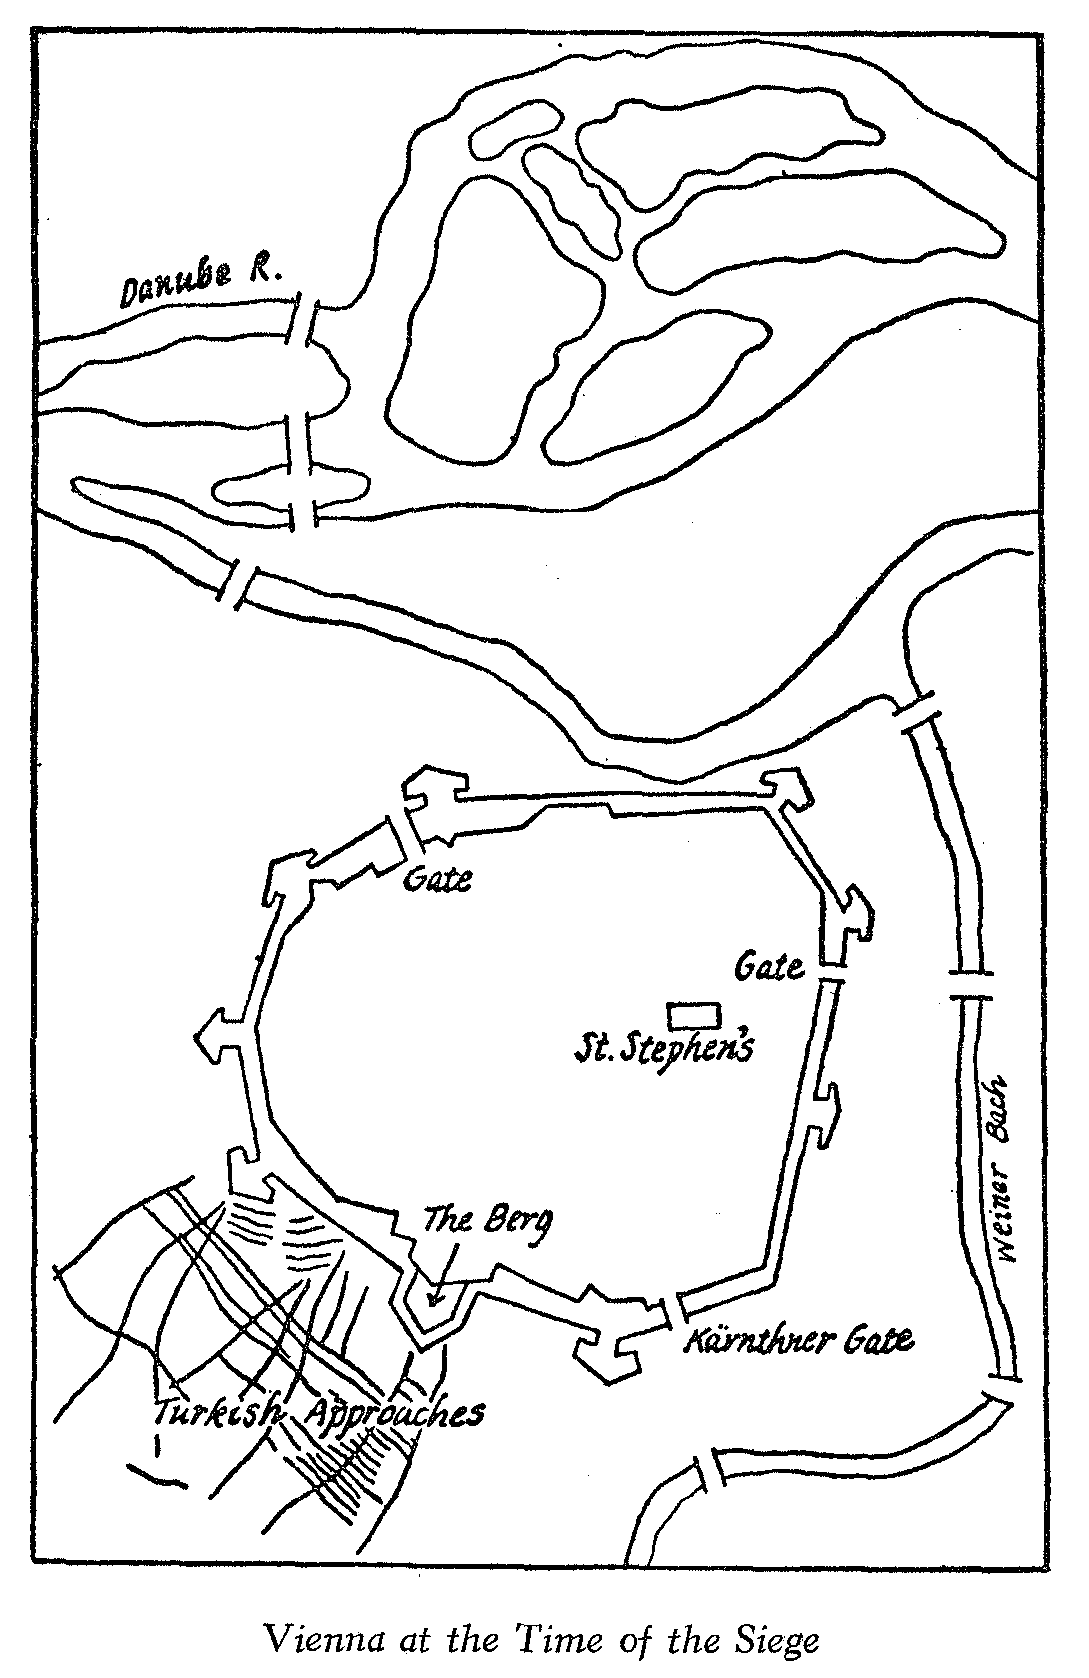 Vienna at the Time of the Siege